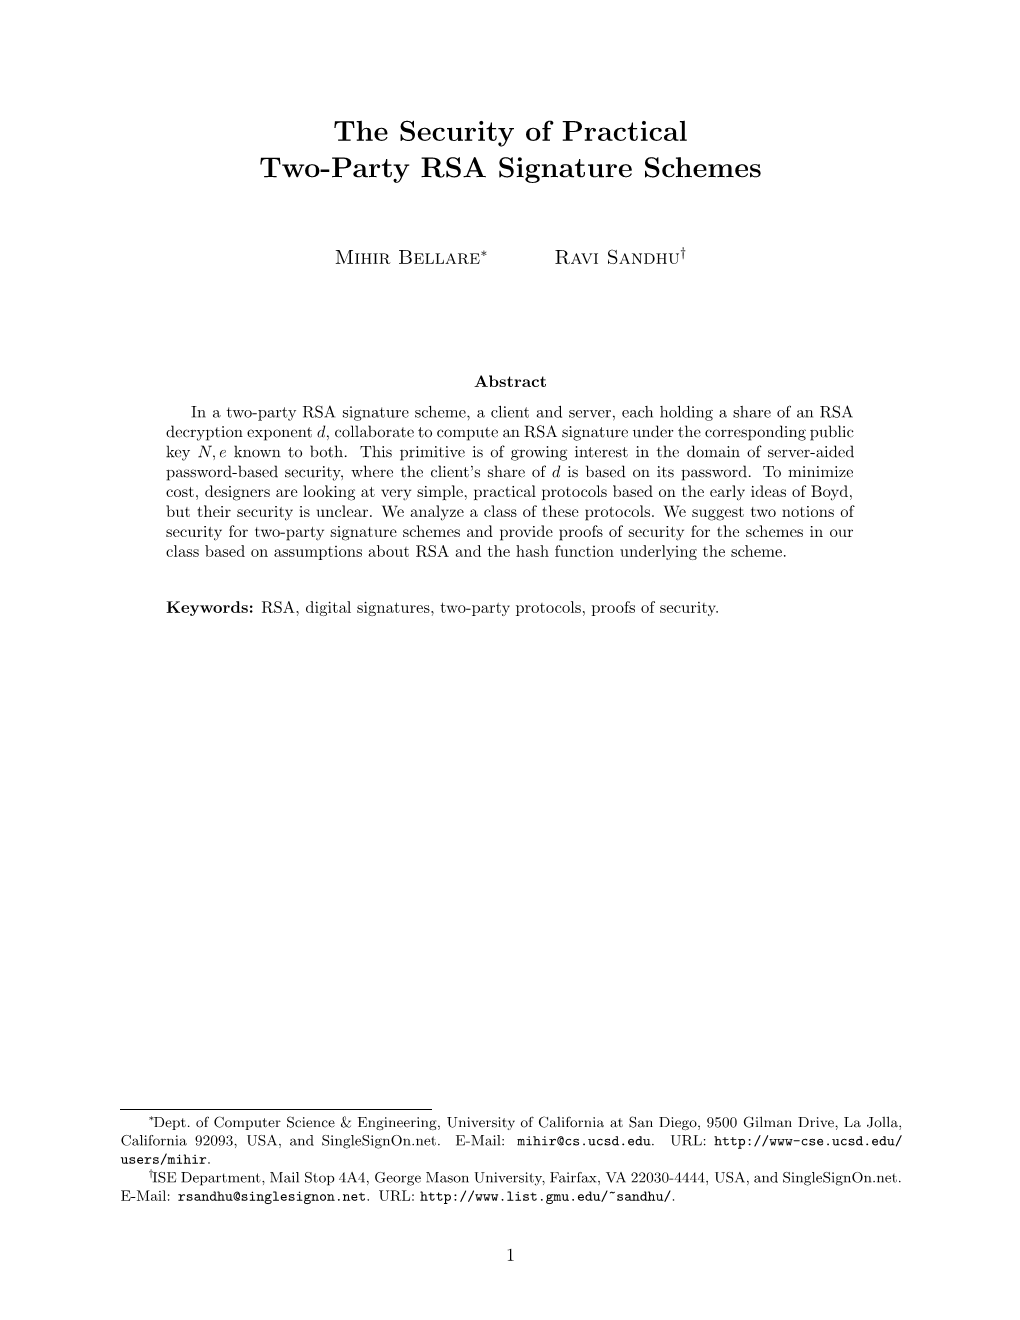 The Security of Practical Two-Party RSA Signature Schemes